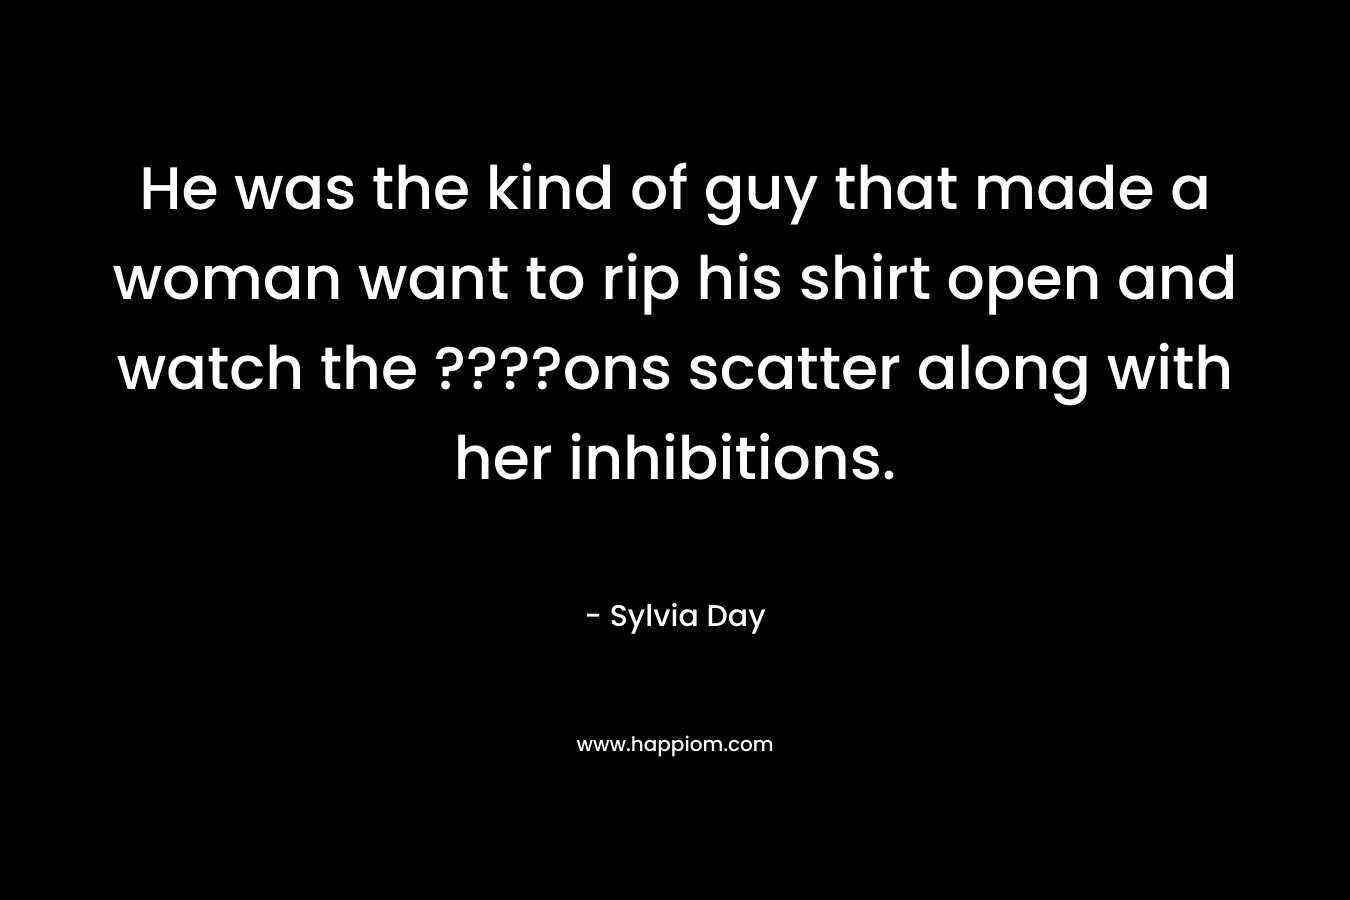 He was the kind of guy that made a woman want to rip his shirt open and watch the ????ons scatter along with her inhibitions. – Sylvia Day